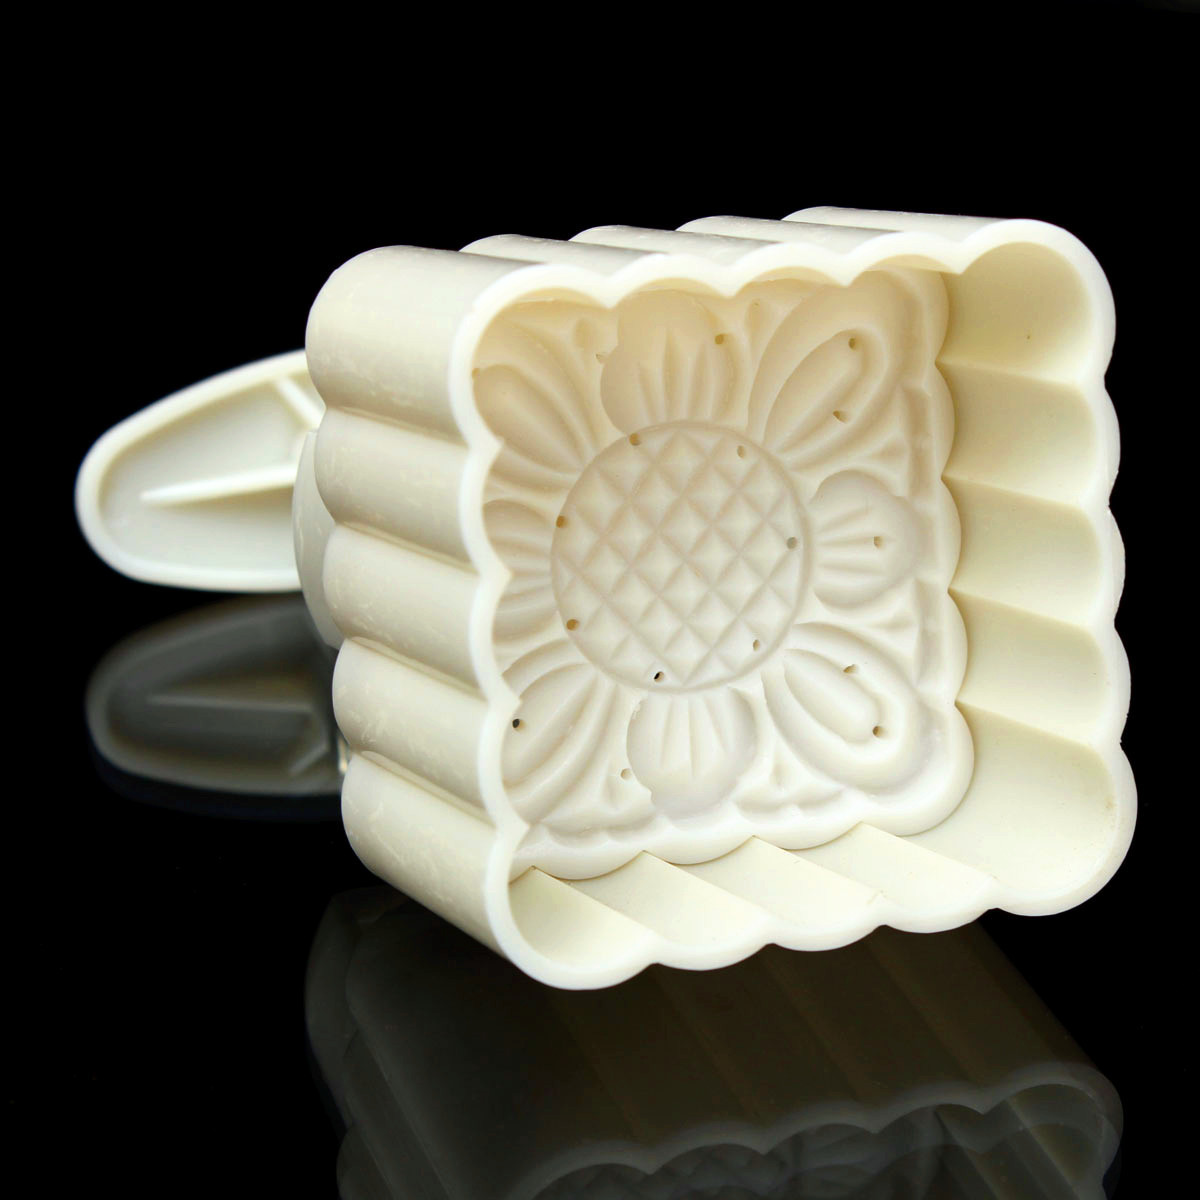 Square-125g-Moonake-Baking-Mooncake-Pastry-Mold-Biscuit-Cake-Hand-Press-Mould-Flower-Cooking-DIY-1339040